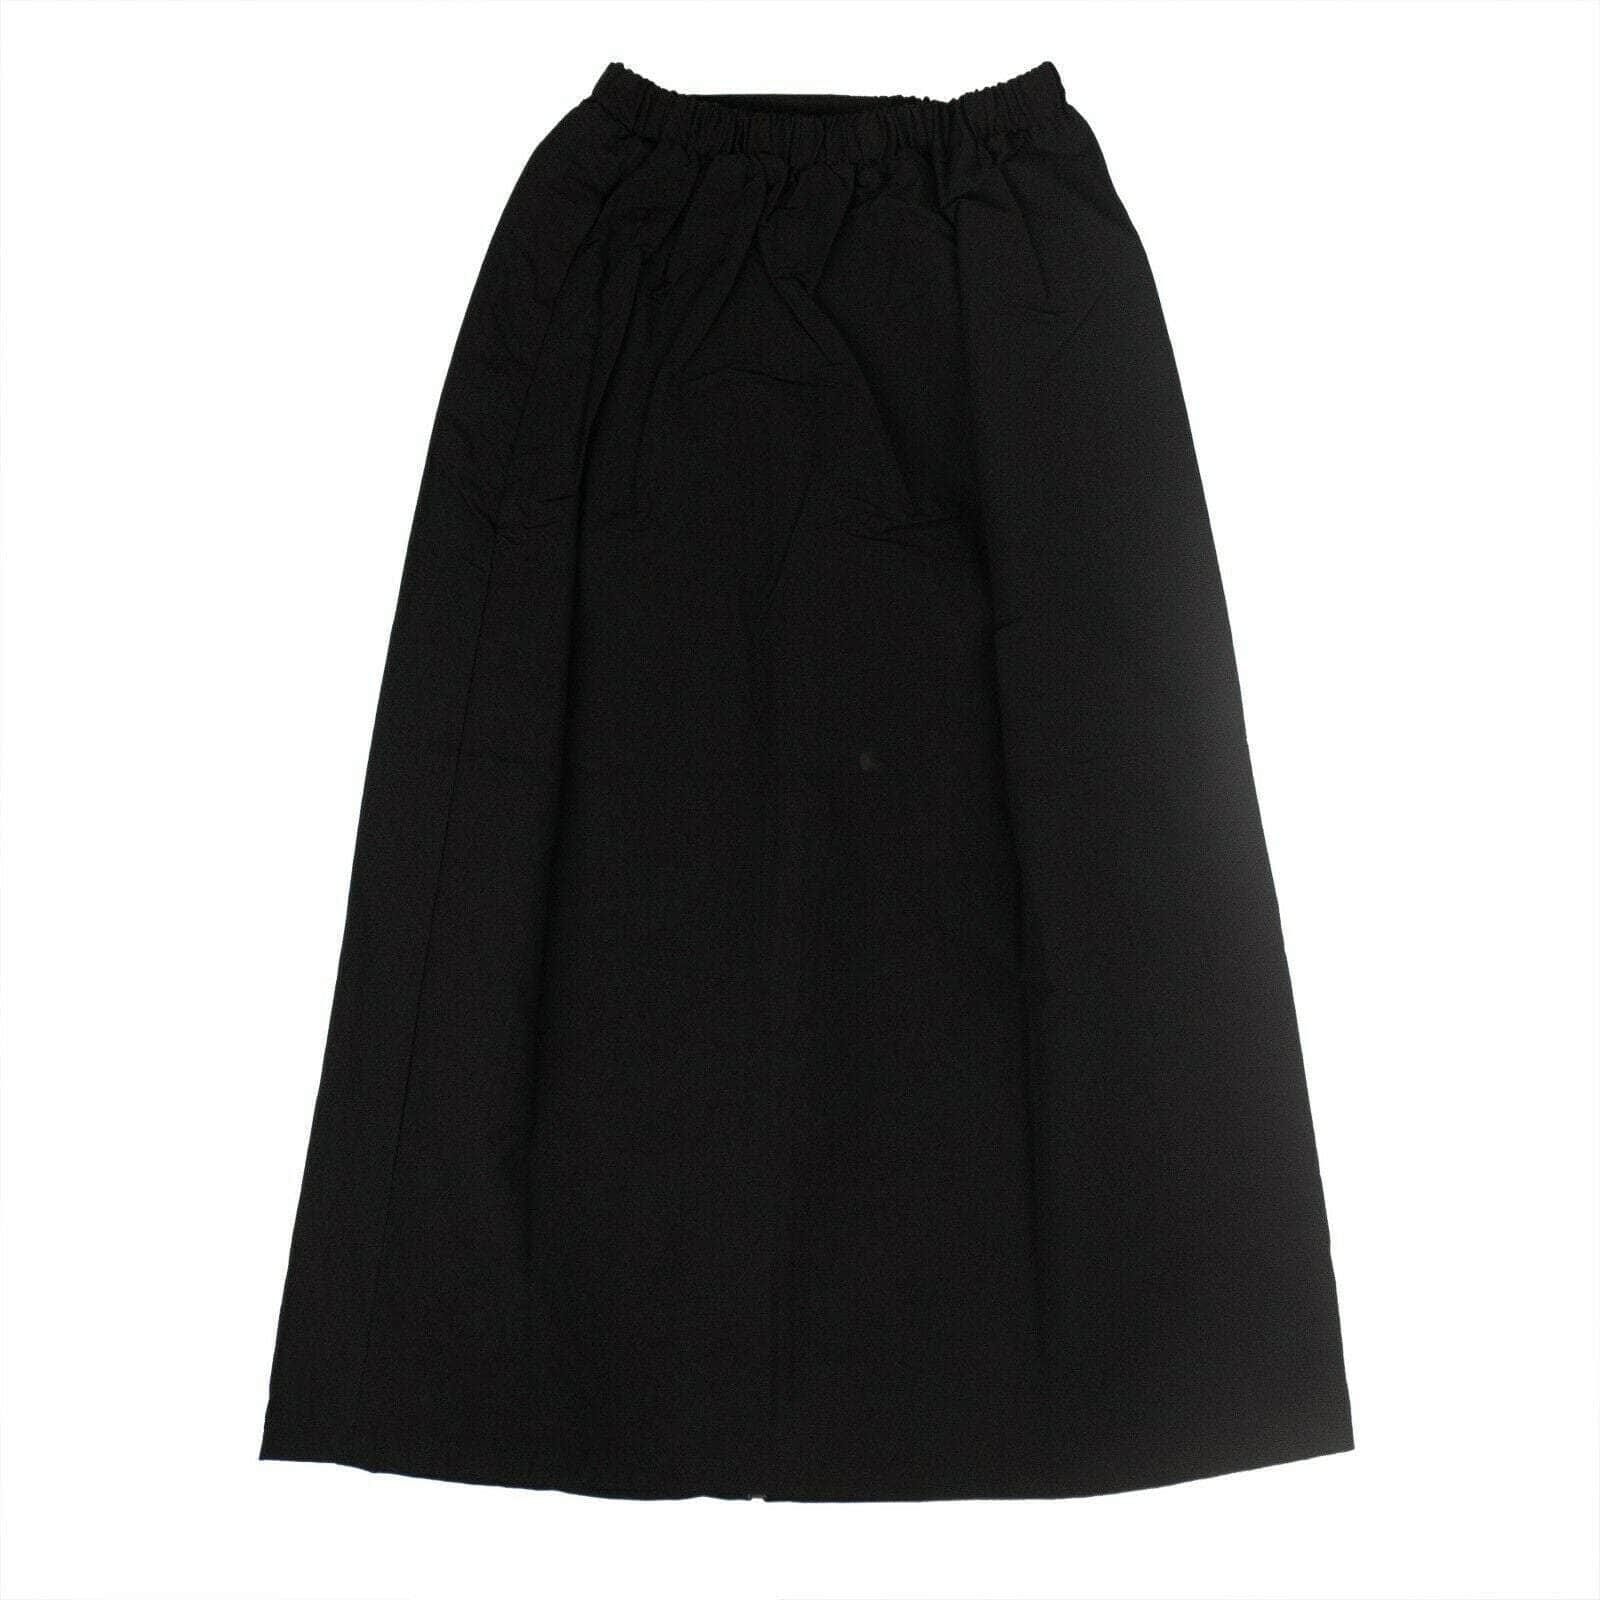 A-COLD-WALL* 250-500, a-cold-wall, couponcollection, gender-womens, main-clothing, size-l, size-m, size-s, size-xs, womens-skirts Cotton Snap Midi Skirt - Black